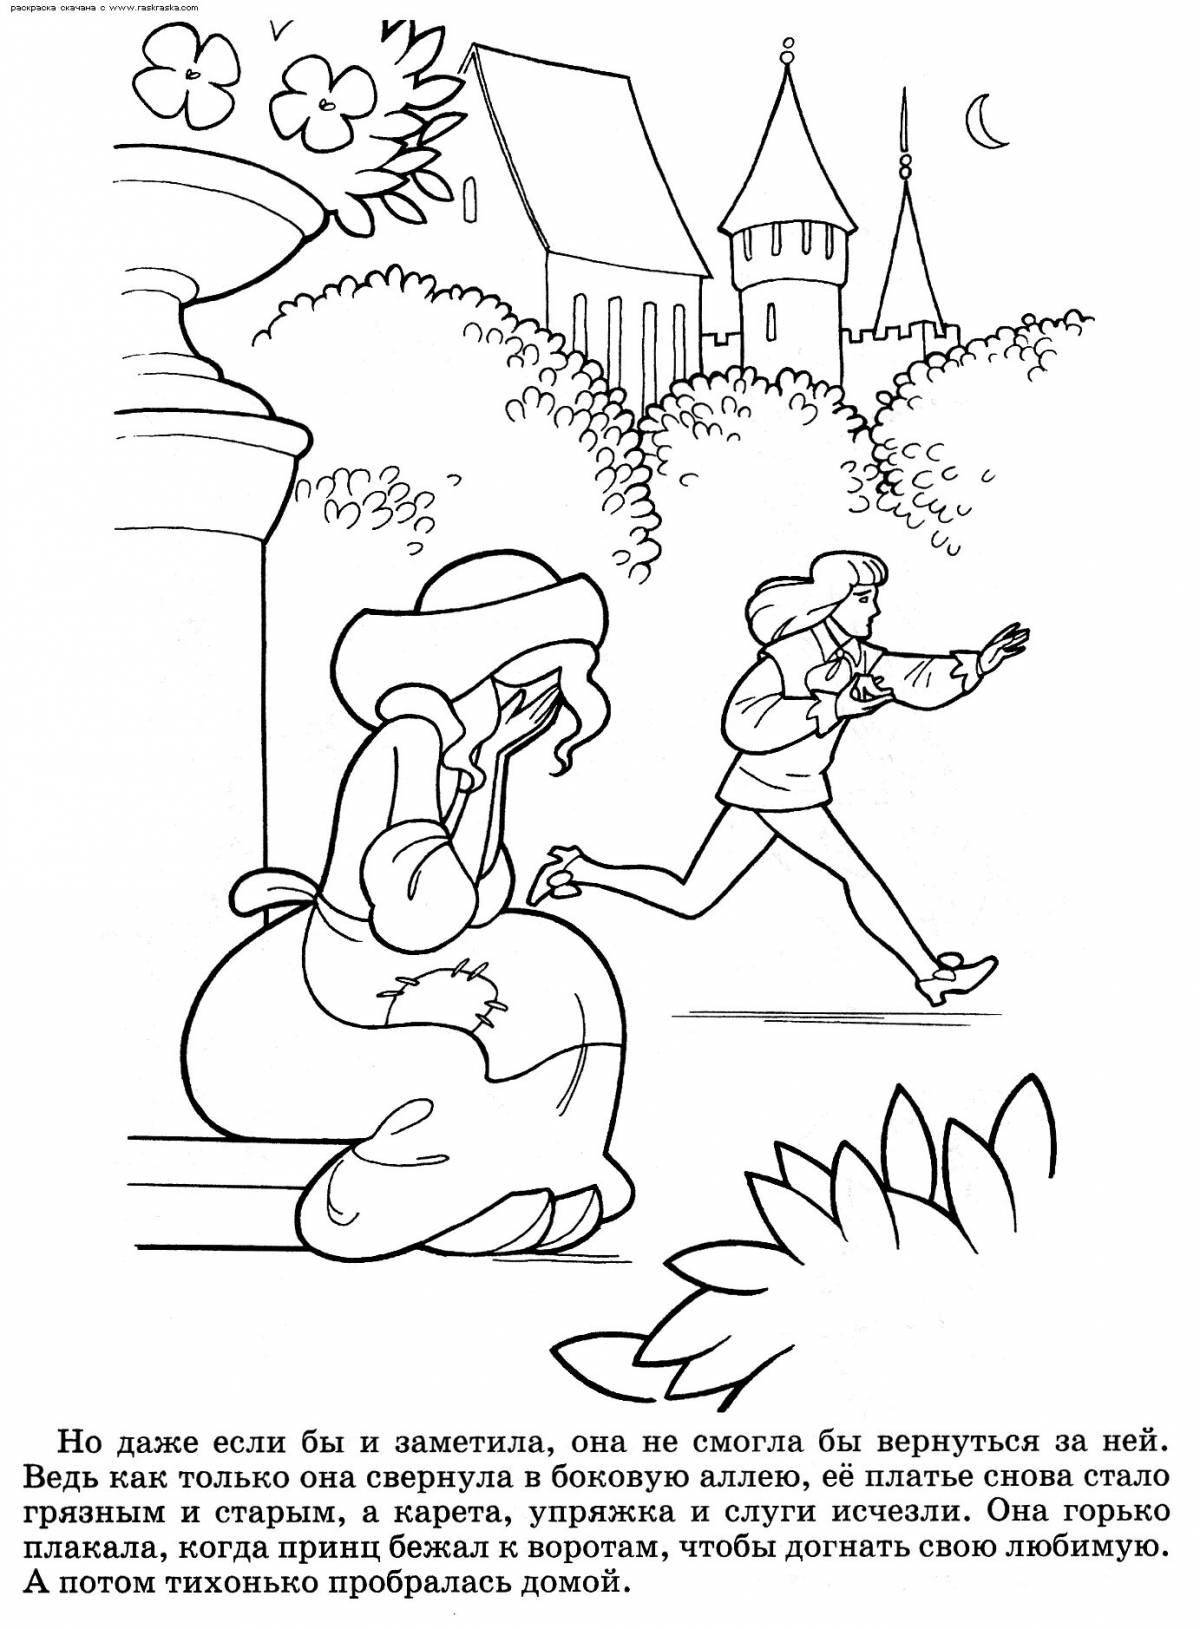 Charming coloring page w perro